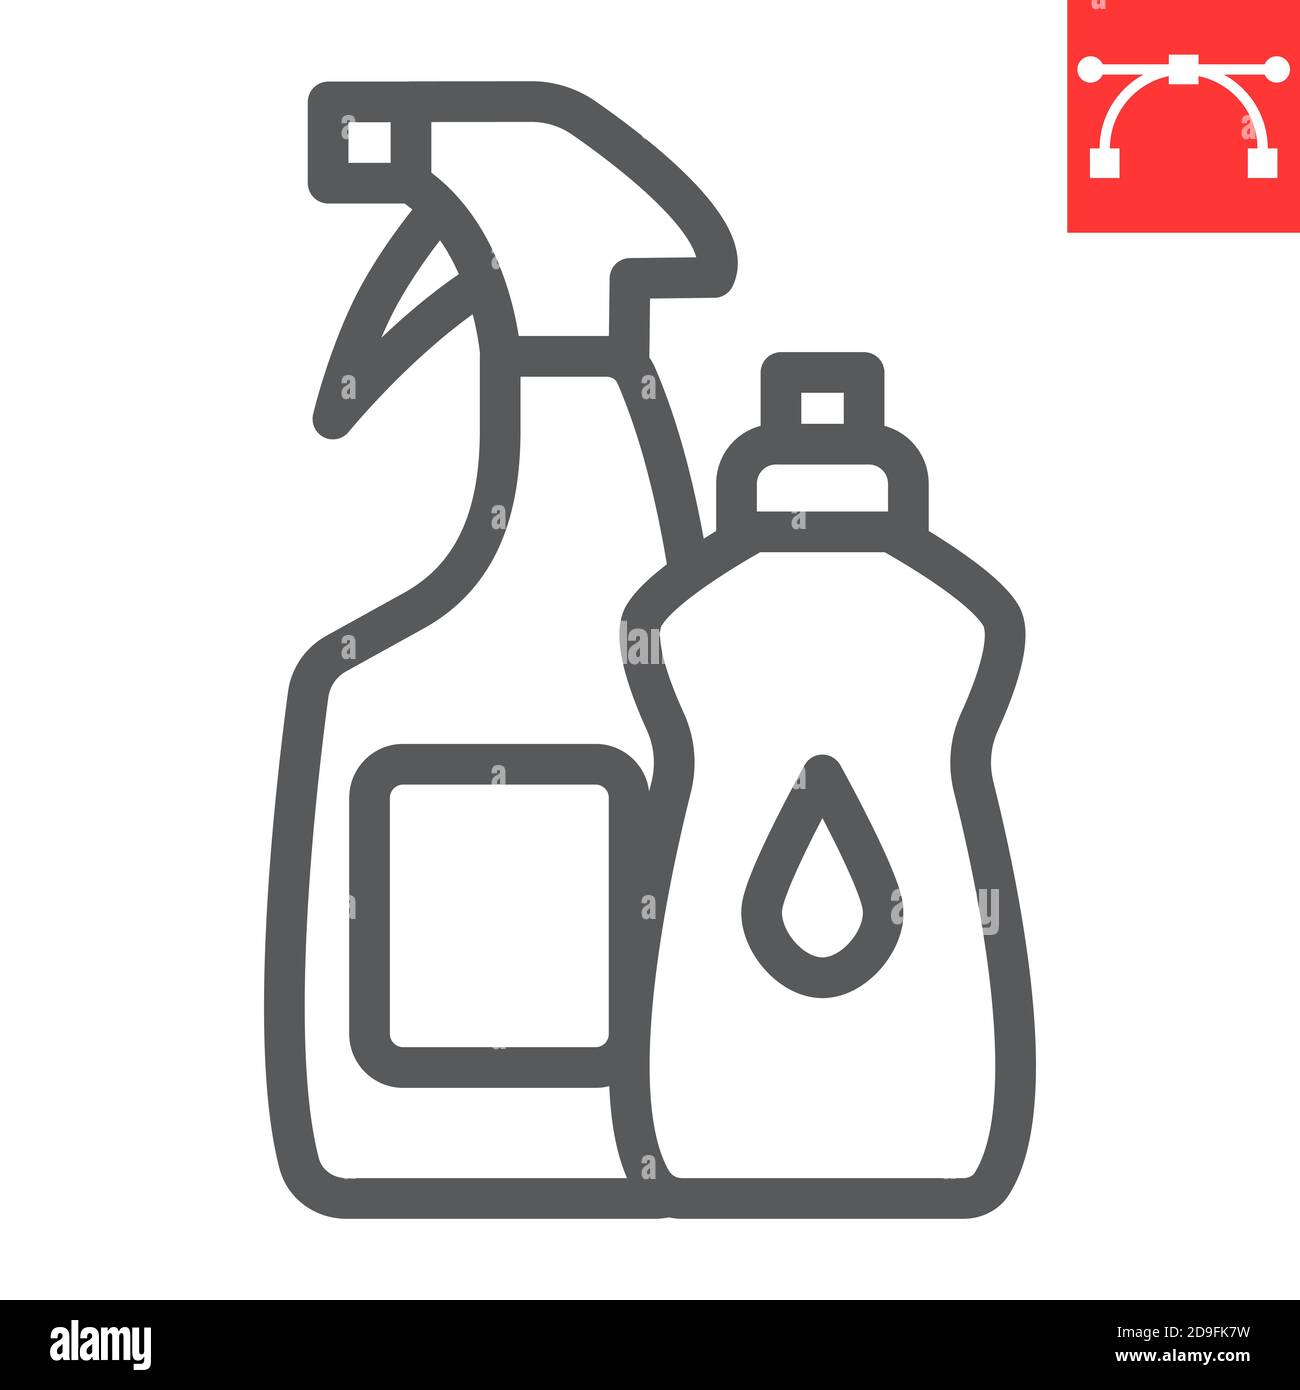 https://c8.alamy.com/comp/2D9FK7W/cleaning-products-line-icon-hygiene-and-chemical-household-cleaner-products-sign-vector-graphics-editable-stroke-linear-icon-eps-10-2D9FK7W.jpg